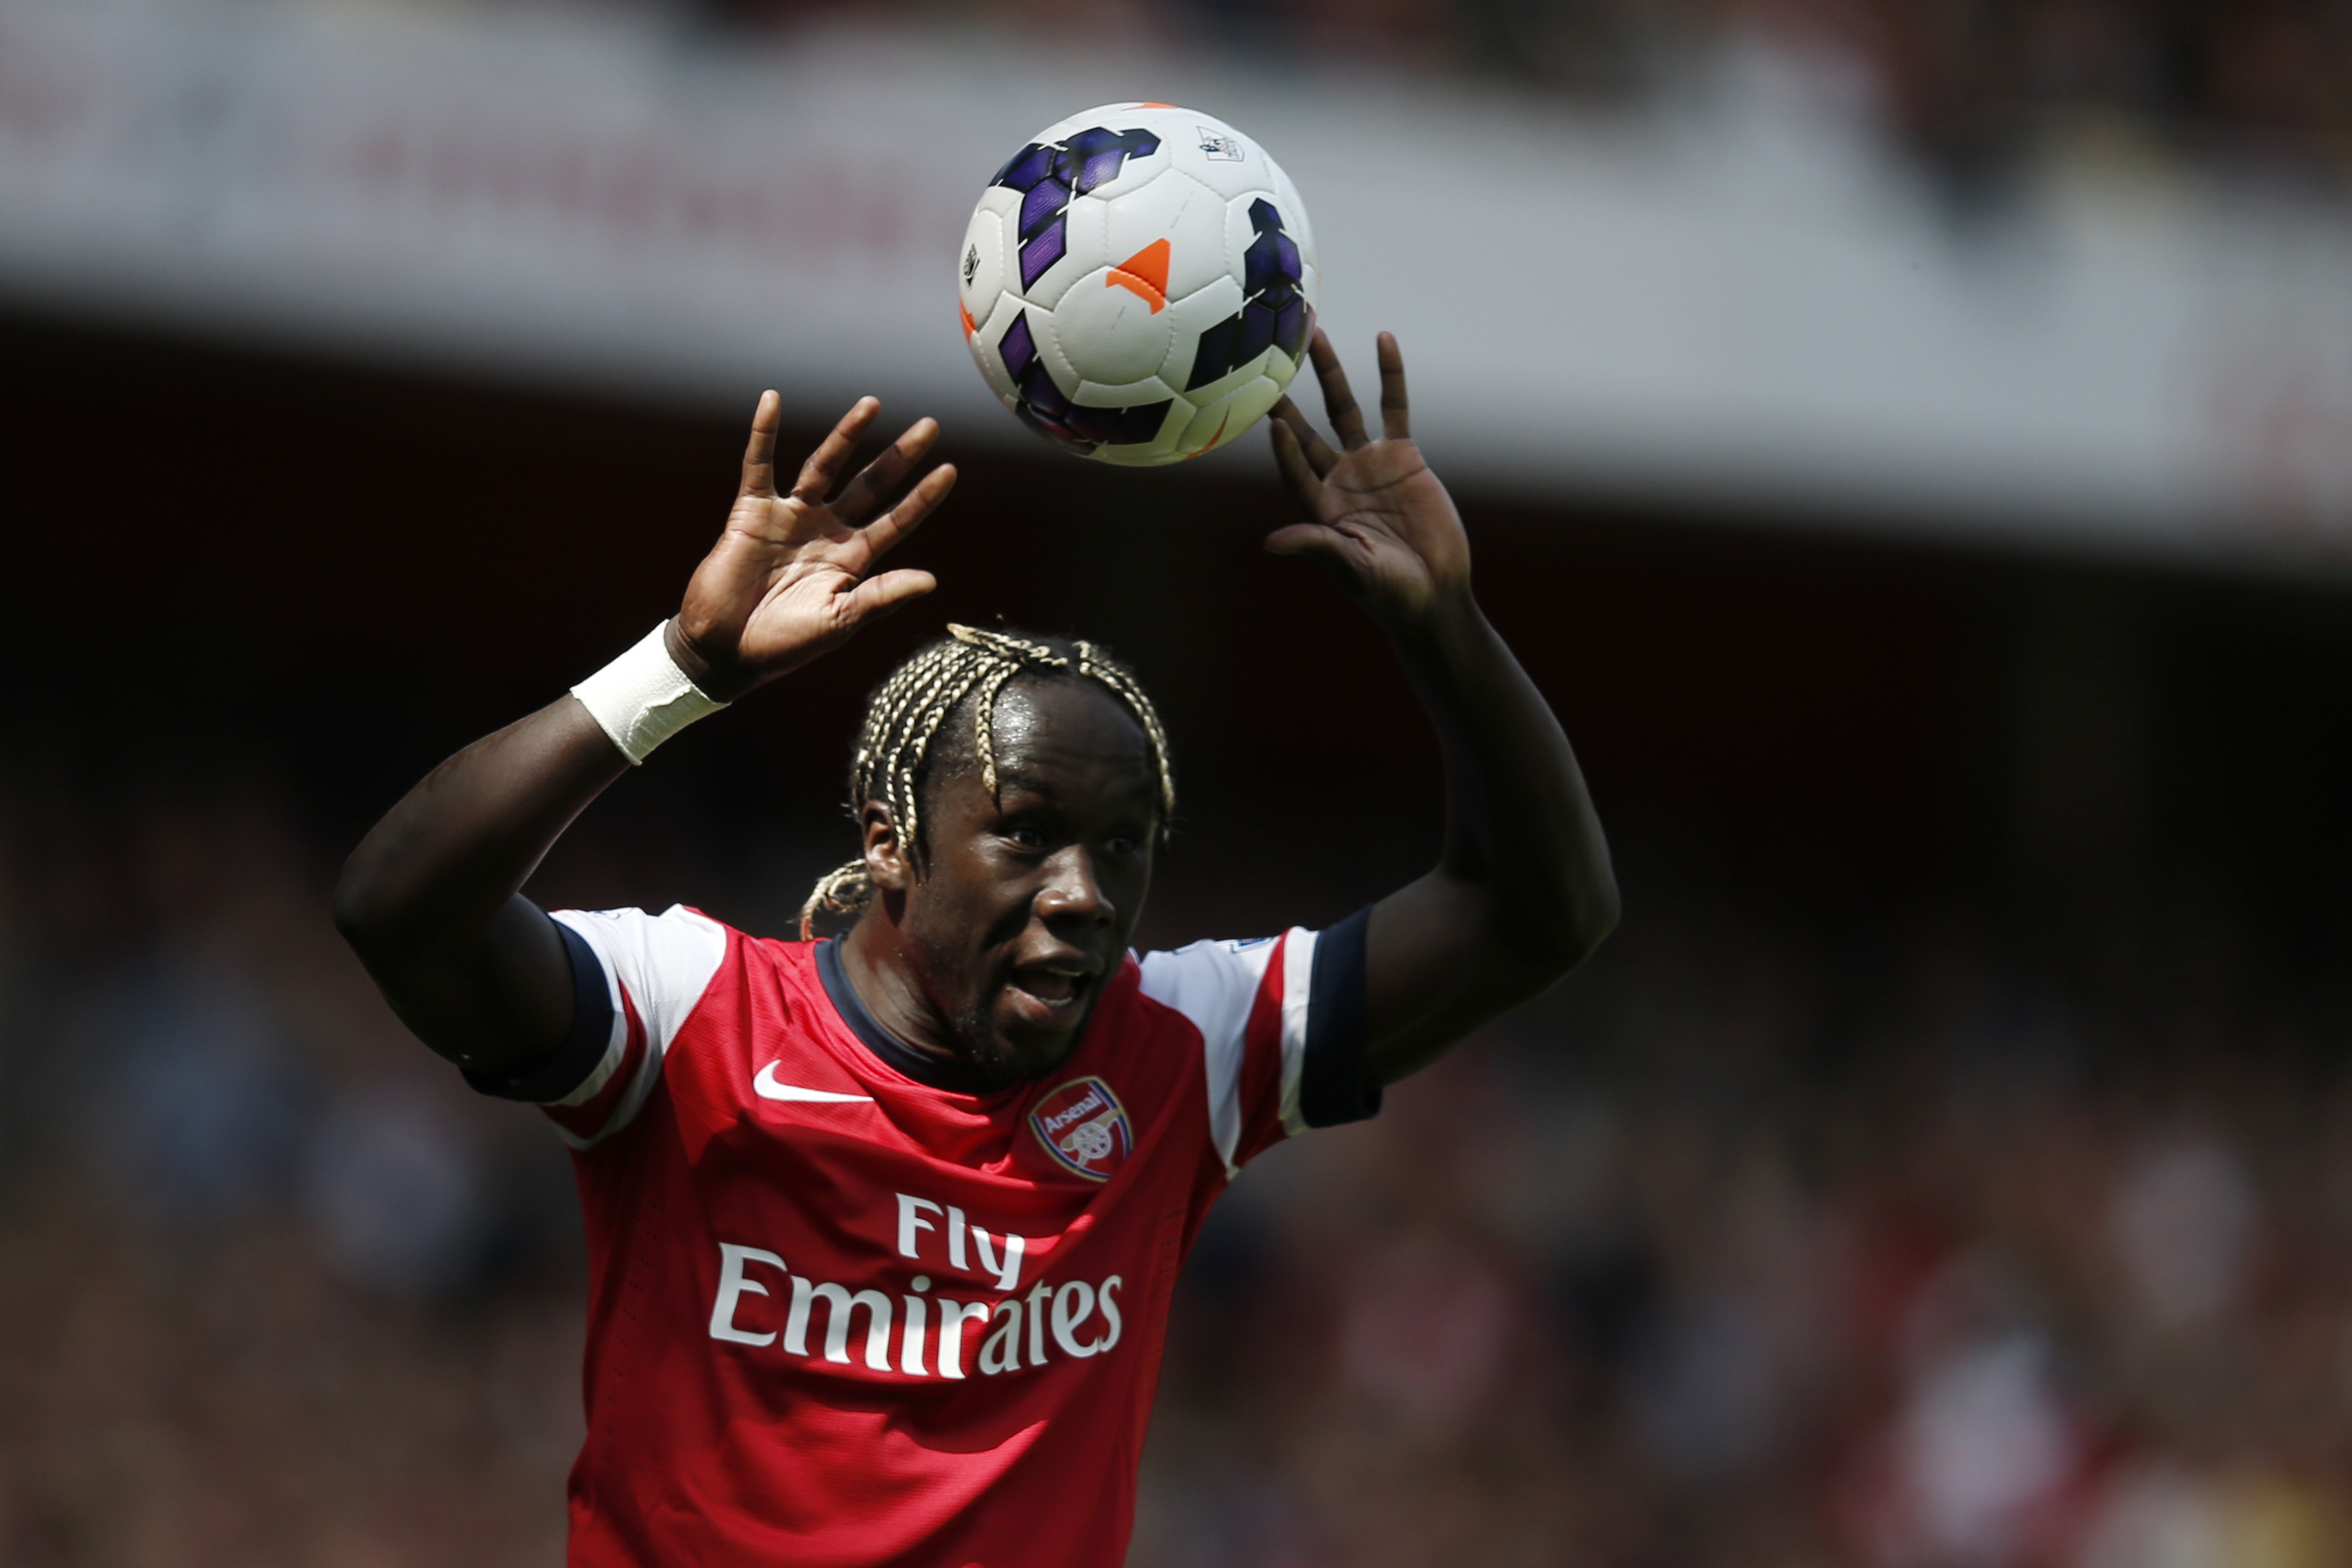 Arsenal's French defender Bacary Sagna takes a throw-in during the English Premier League football match between Arsenal and West Bromwich Albion at The Emirates Stadium in north London on May 4, 2014. AFP PHOTO / ADRIAN DENNIS

RESTRICTED TO EDITORIAL USE. No use with unauthorized audio, video, data, fixture lists, club/league logos or live services. Online in-match use limited to 45 images, no video emulation. No use in betting, games or single club/league/player publications.        (Photo credit should read ADRIAN DENNIS/AFP/Getty Images)